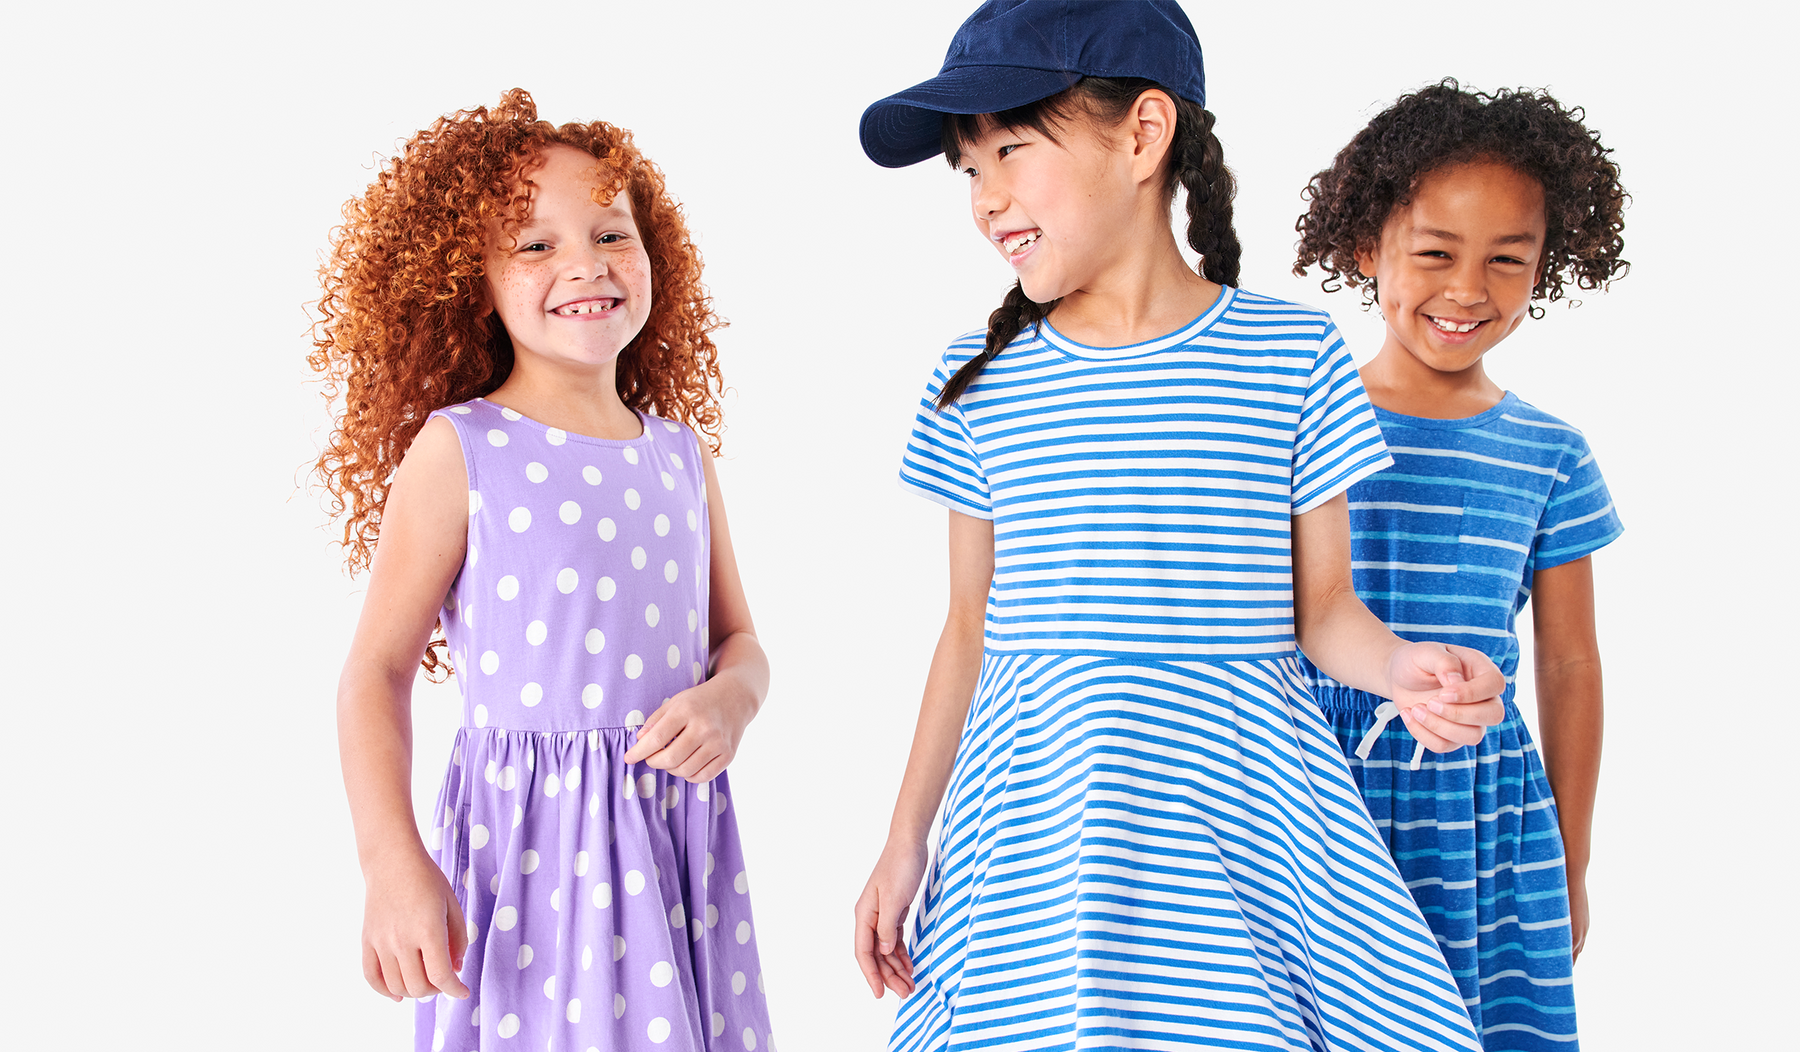 What Does It Mean for Kids Clothes to Be Gender-Neutral?